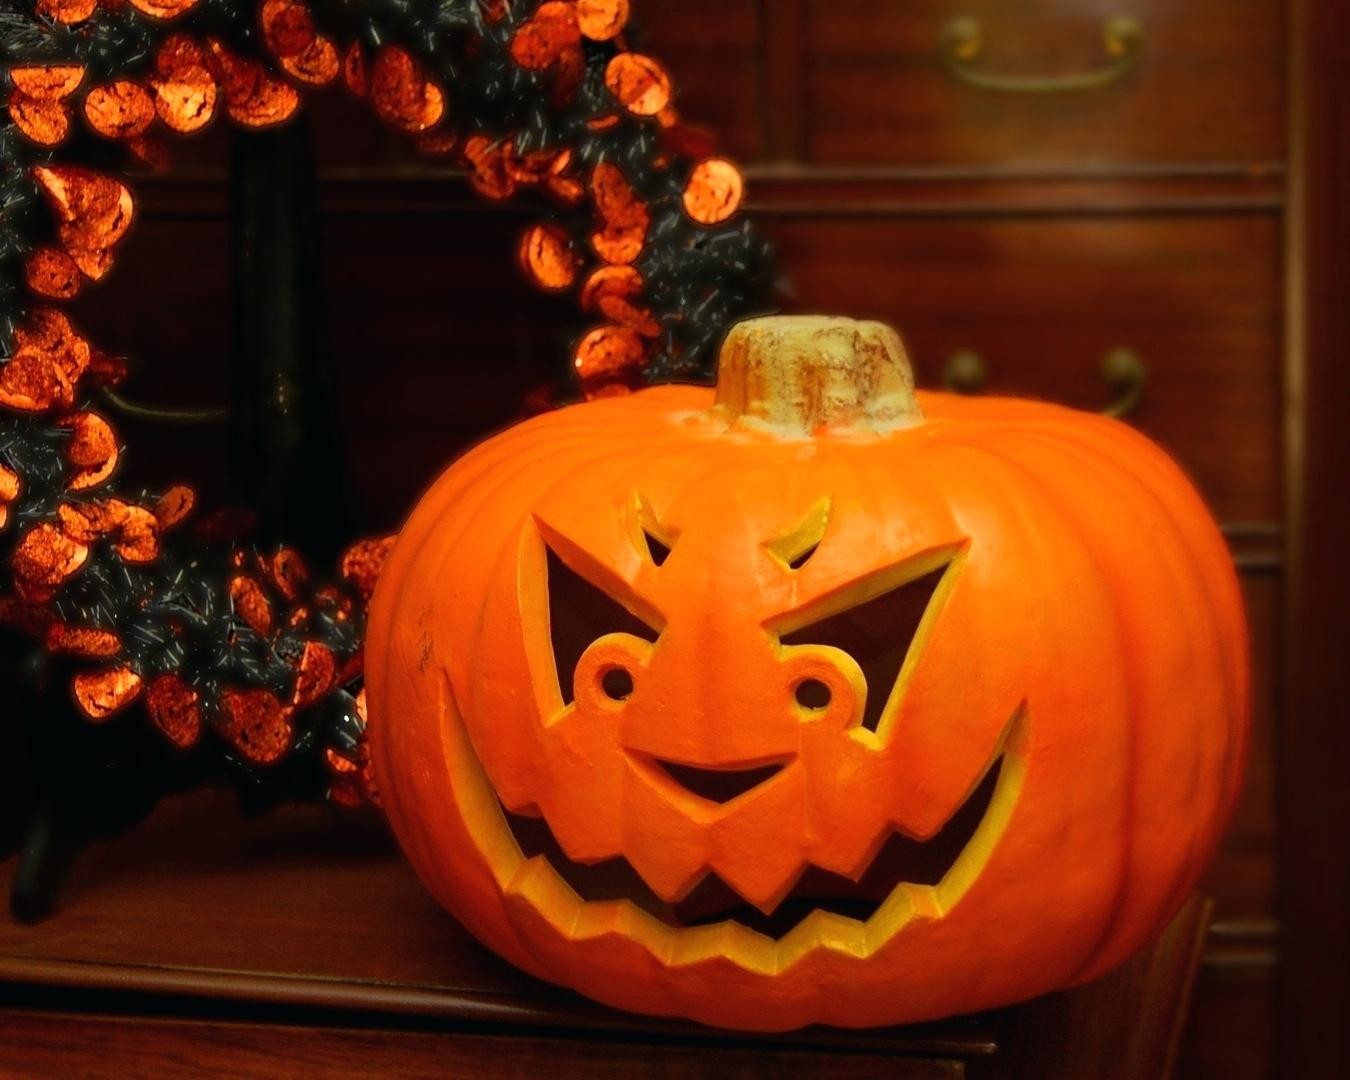 Decoration Cool Pumpkin Carving Ideas Pictures Free Patterns